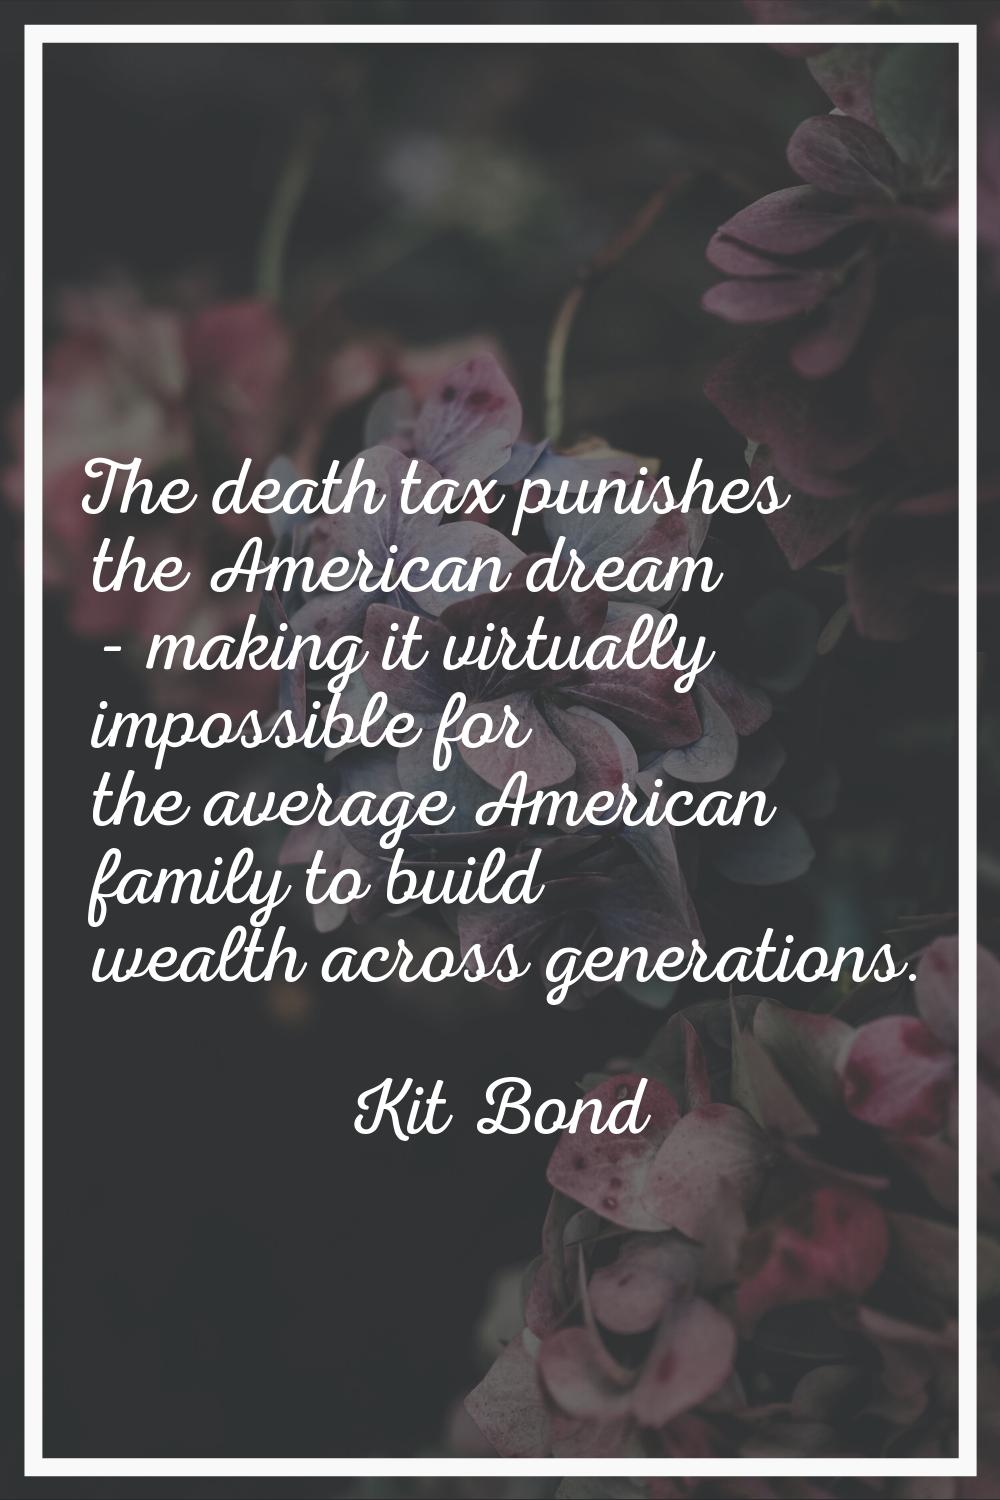 The death tax punishes the American dream - making it virtually impossible for the average American